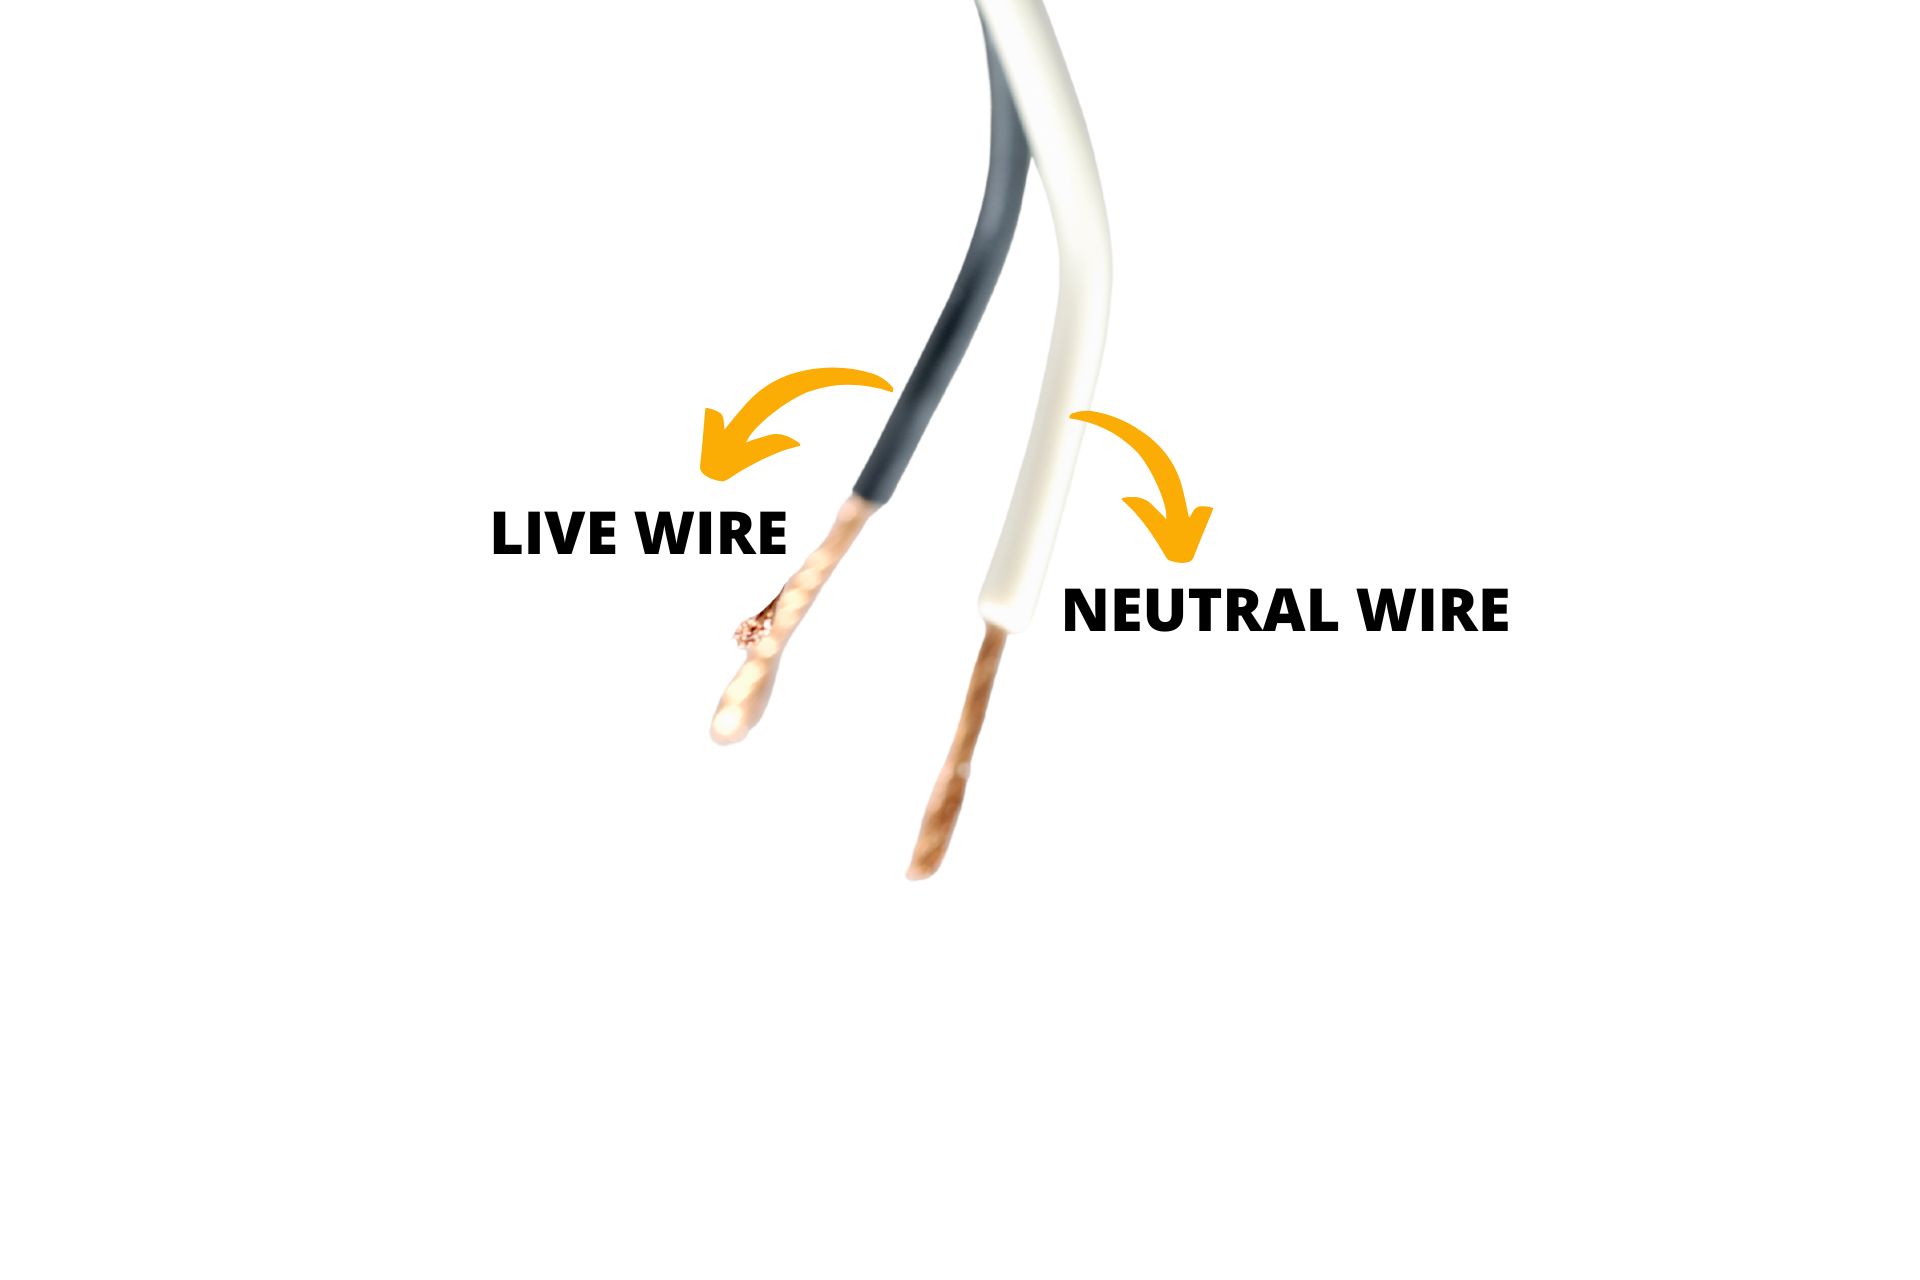 What Does L and N Mean On Wires